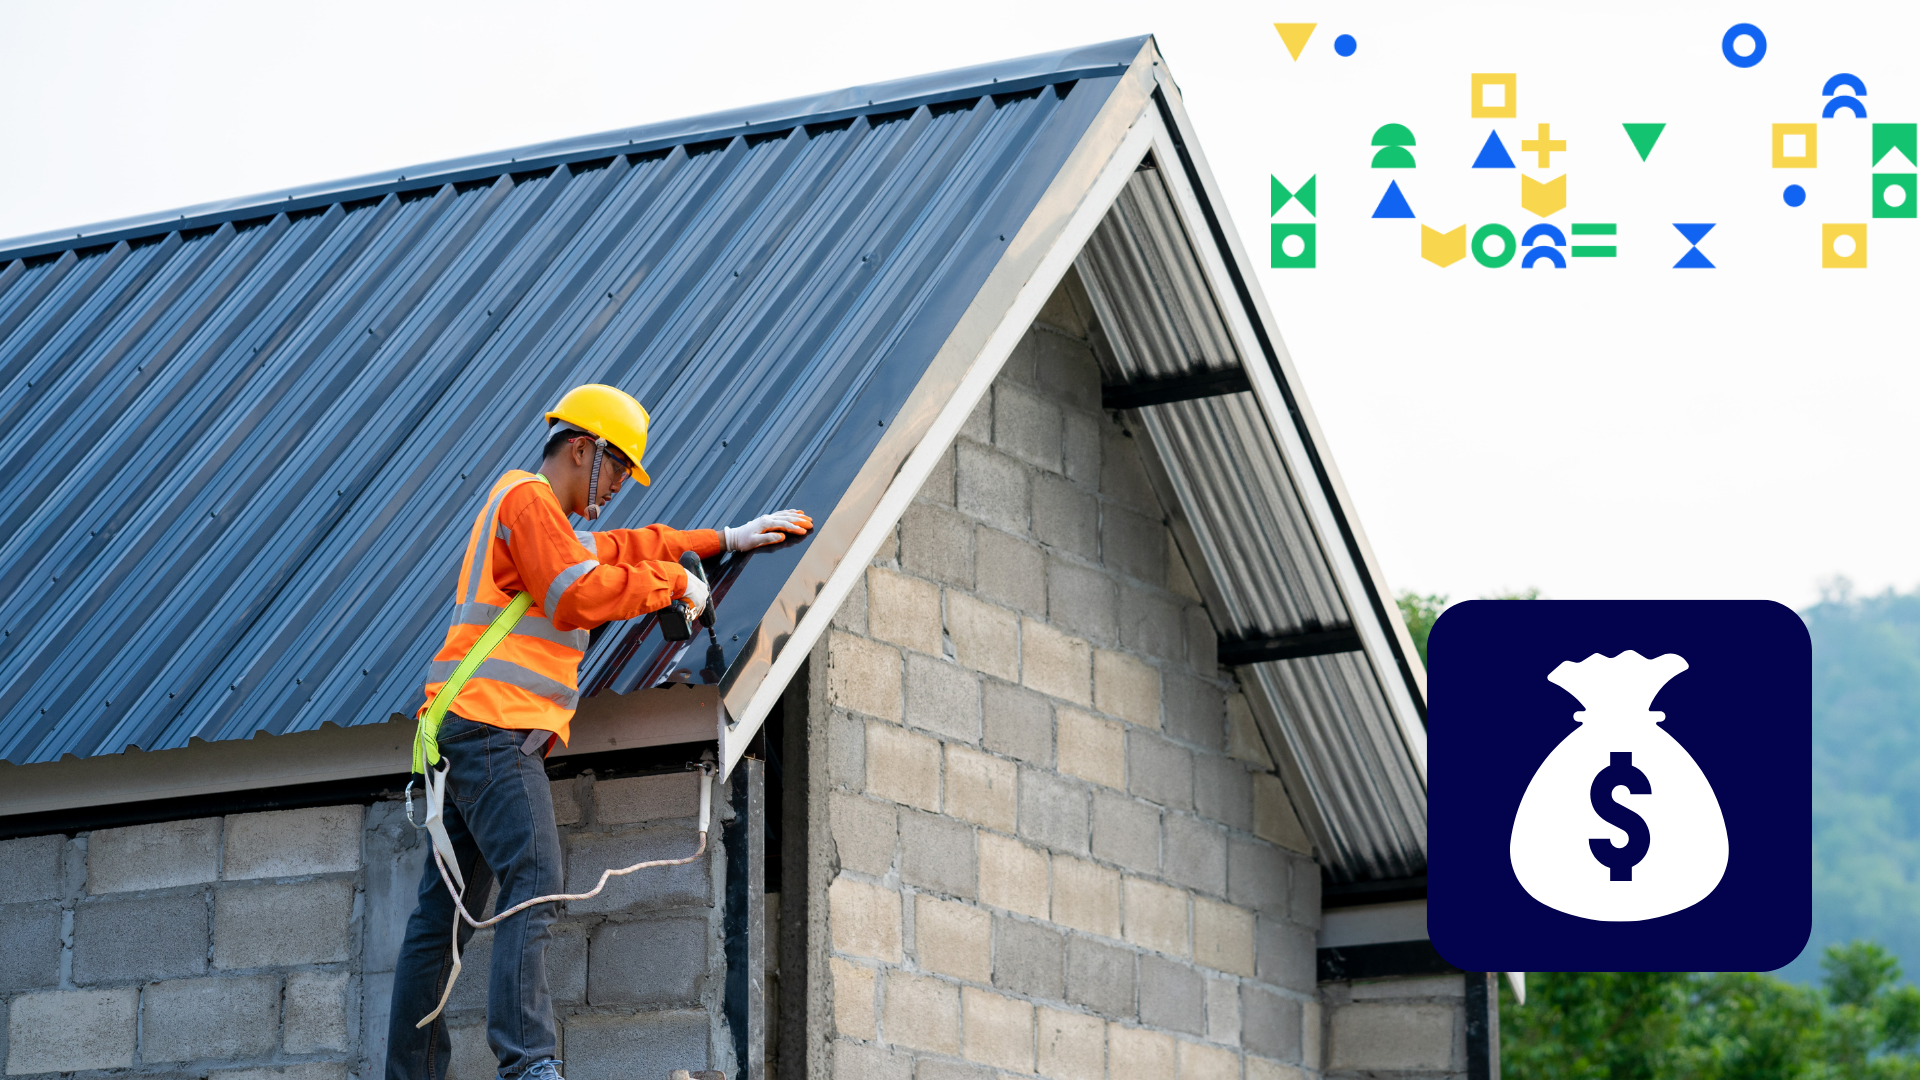 Image of a construction worker installing new roofing. The image has an icon of a money bag on top.